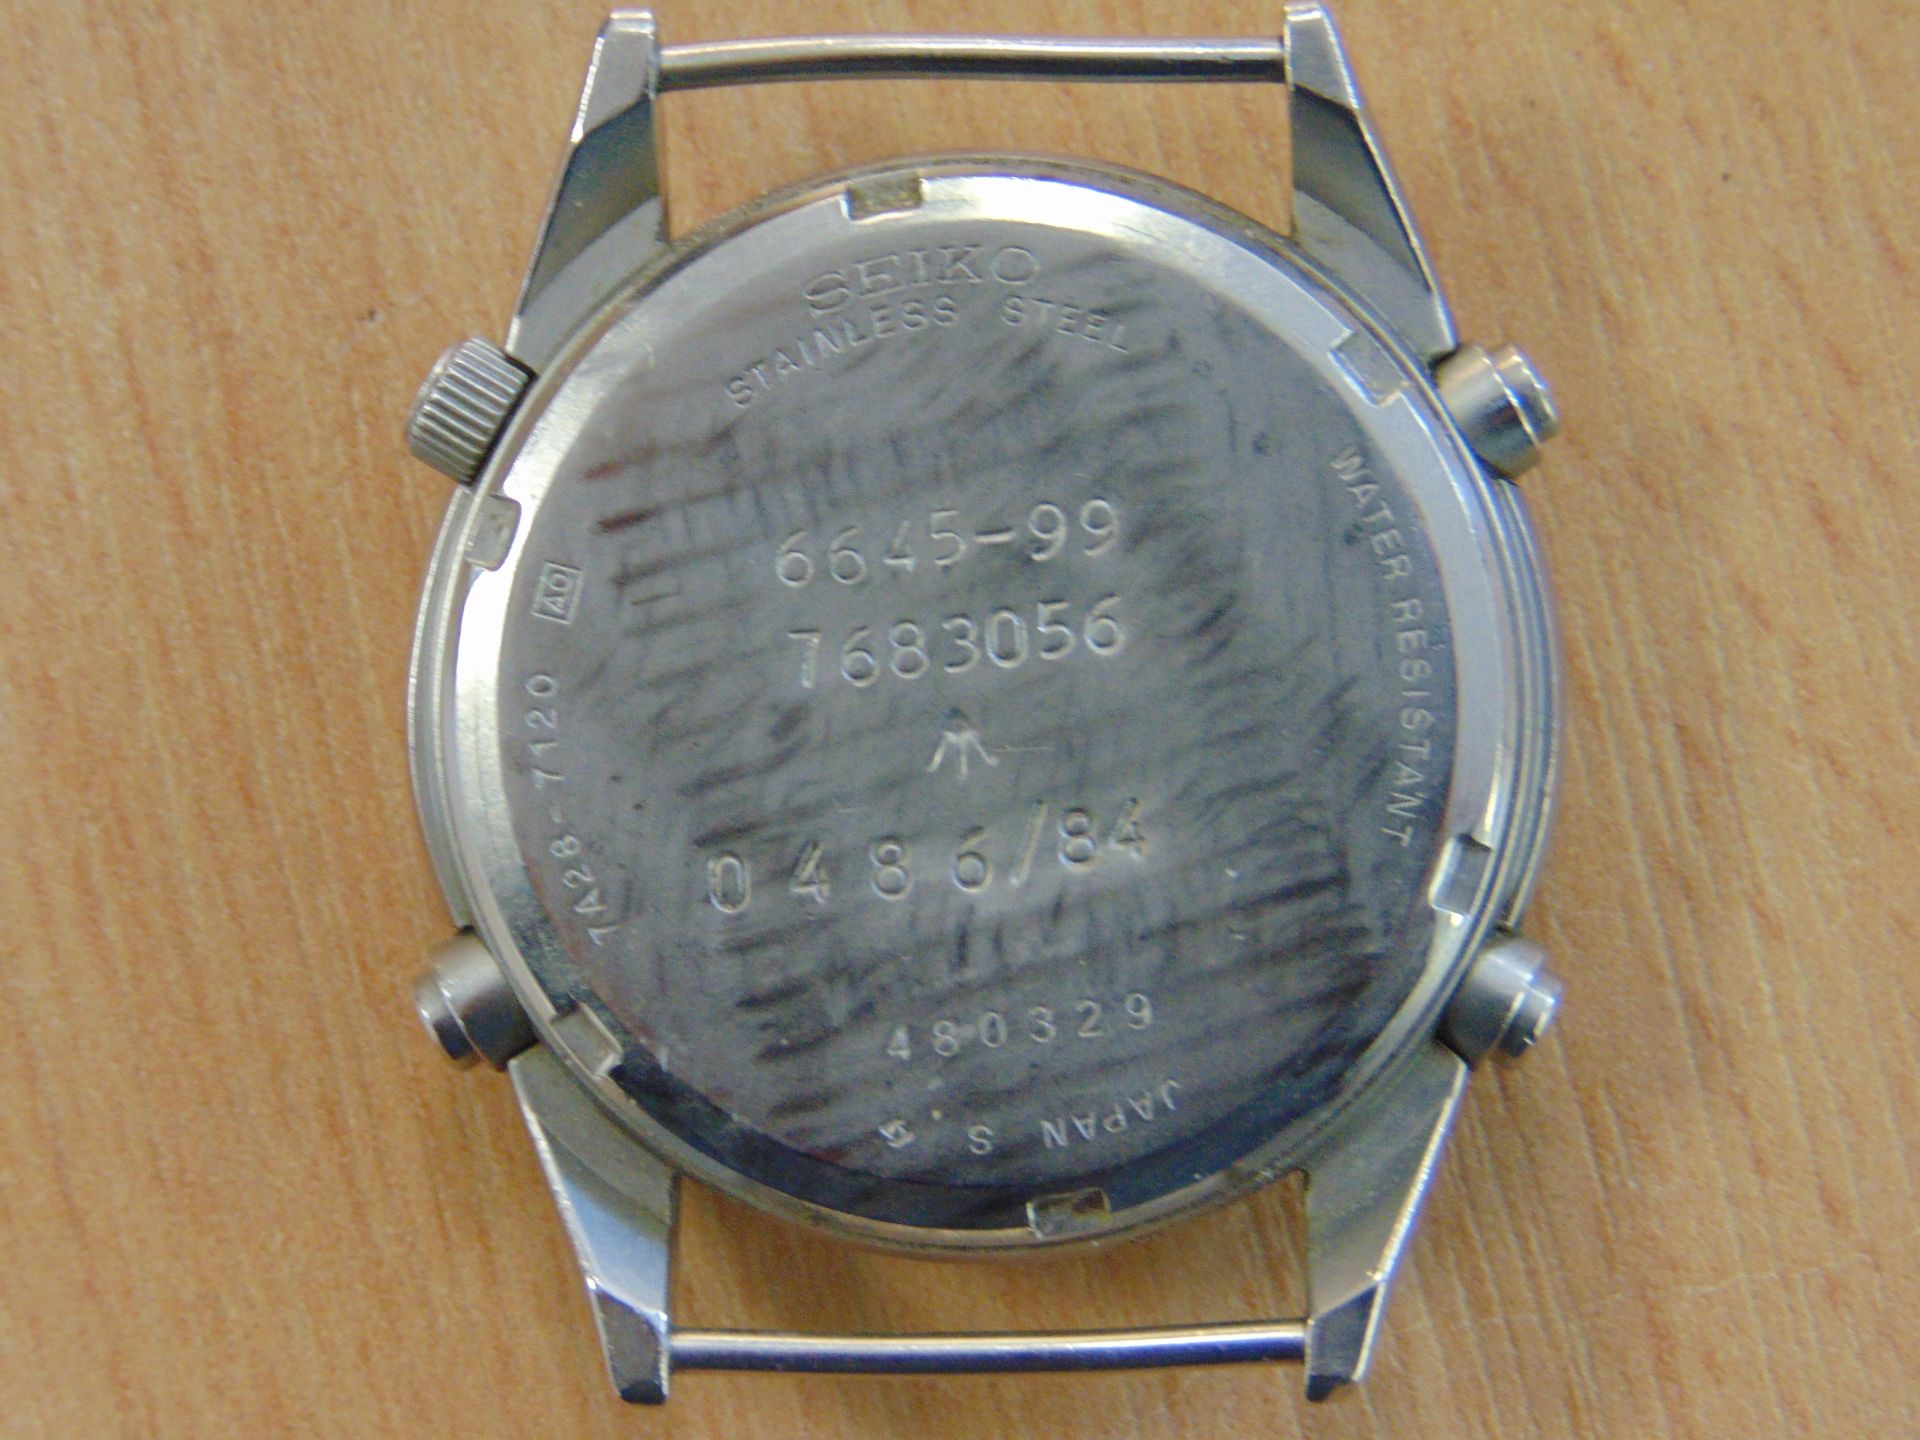 SEIKO GEN 1 PILOTS CHRONO RAF ISSUE WATCH NATO MARKINGS DATED 1984 - Image 6 of 9